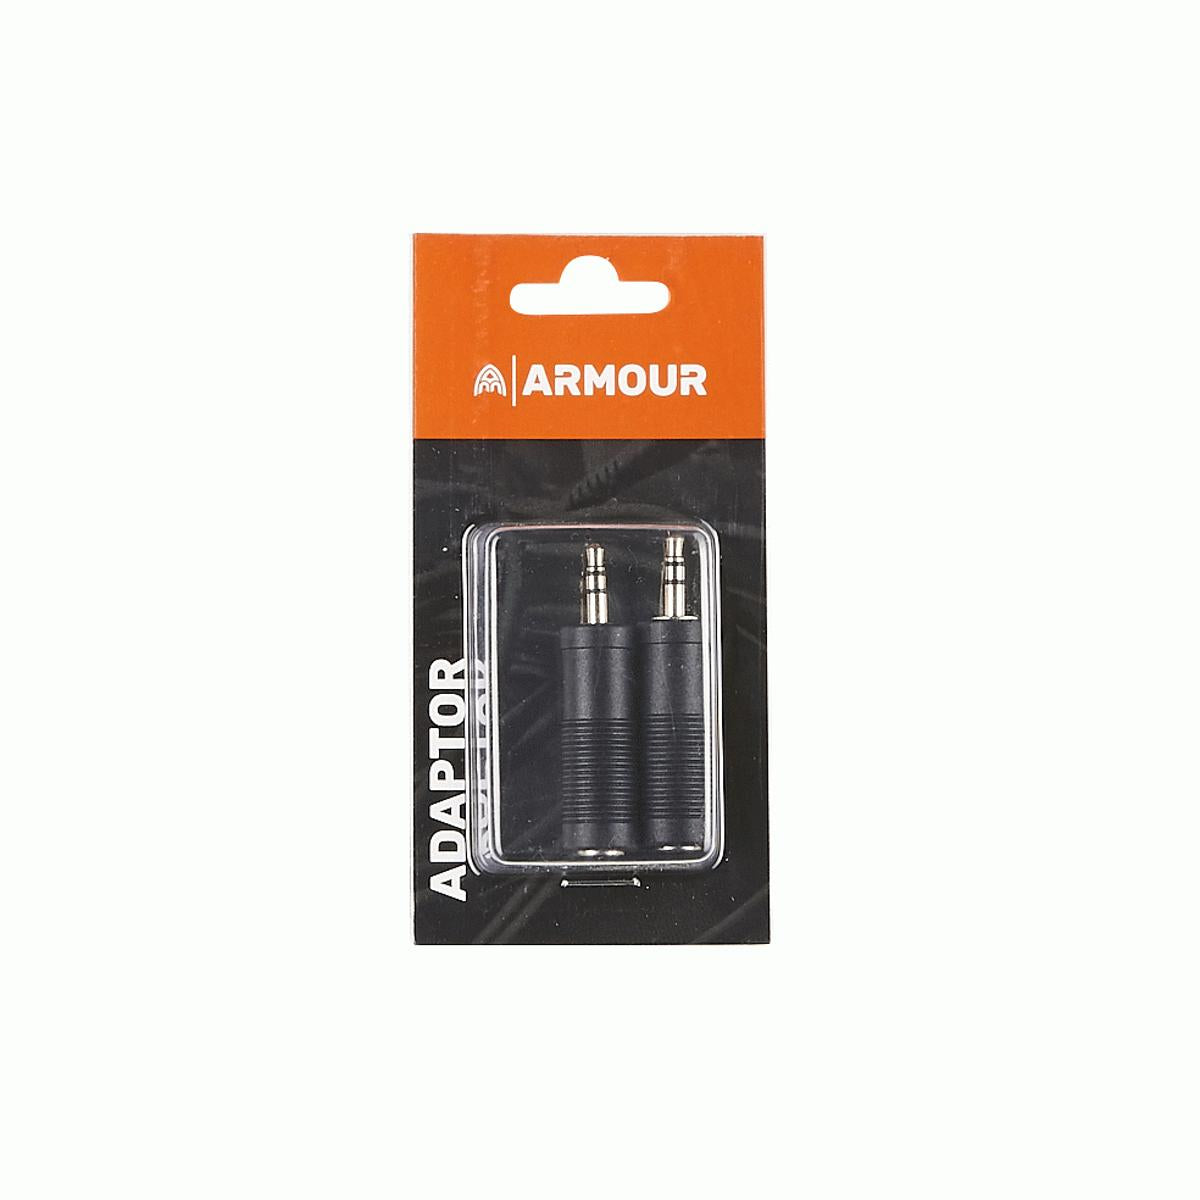 Armour ADAP1 6.5mm Female to 3.5mm Male Stereo Adaptor - 2 Pieces